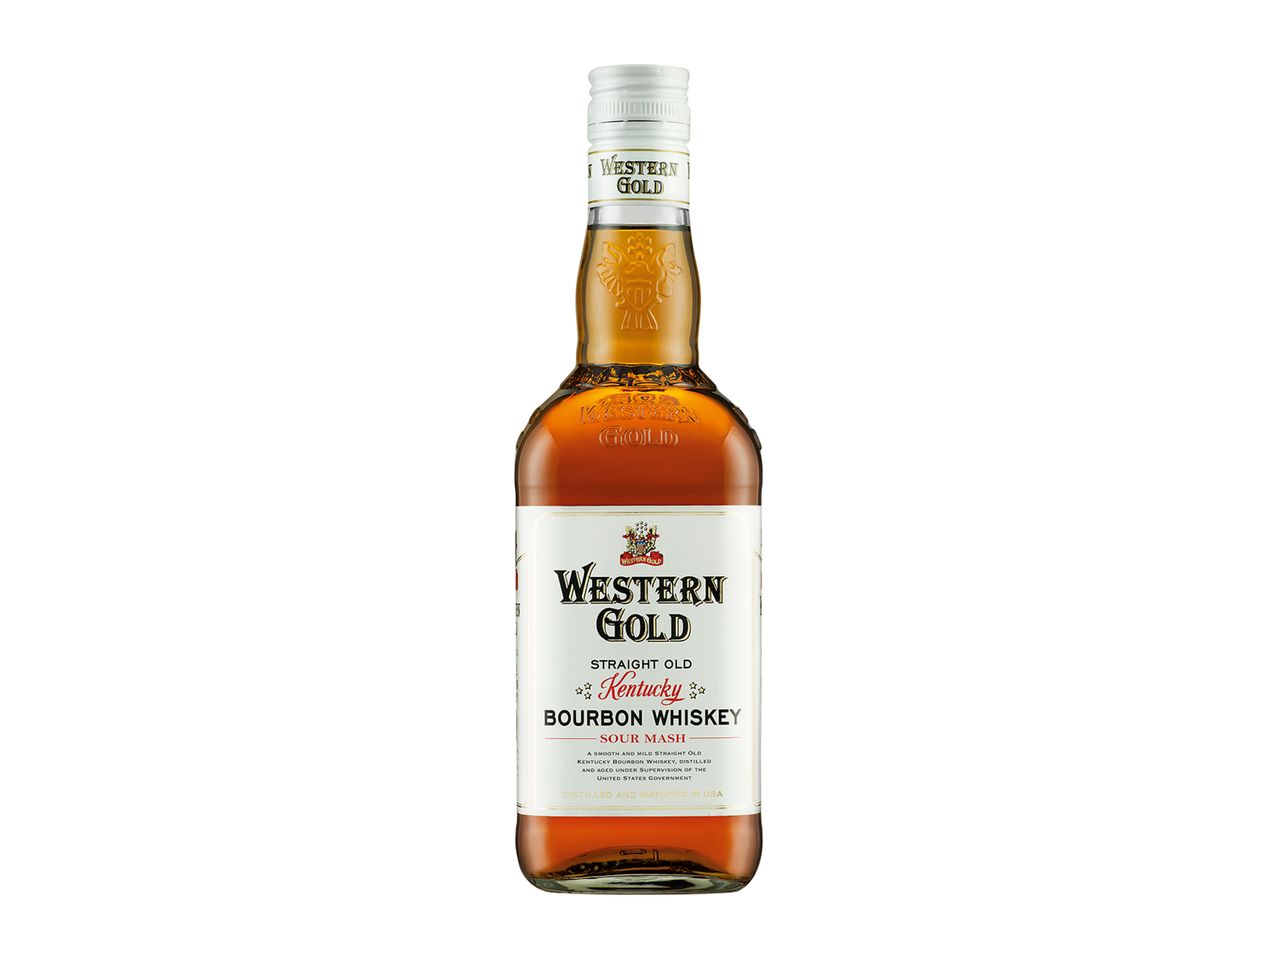 Go to full screen view: Western Gold Bourbon Whiskey - Image 1